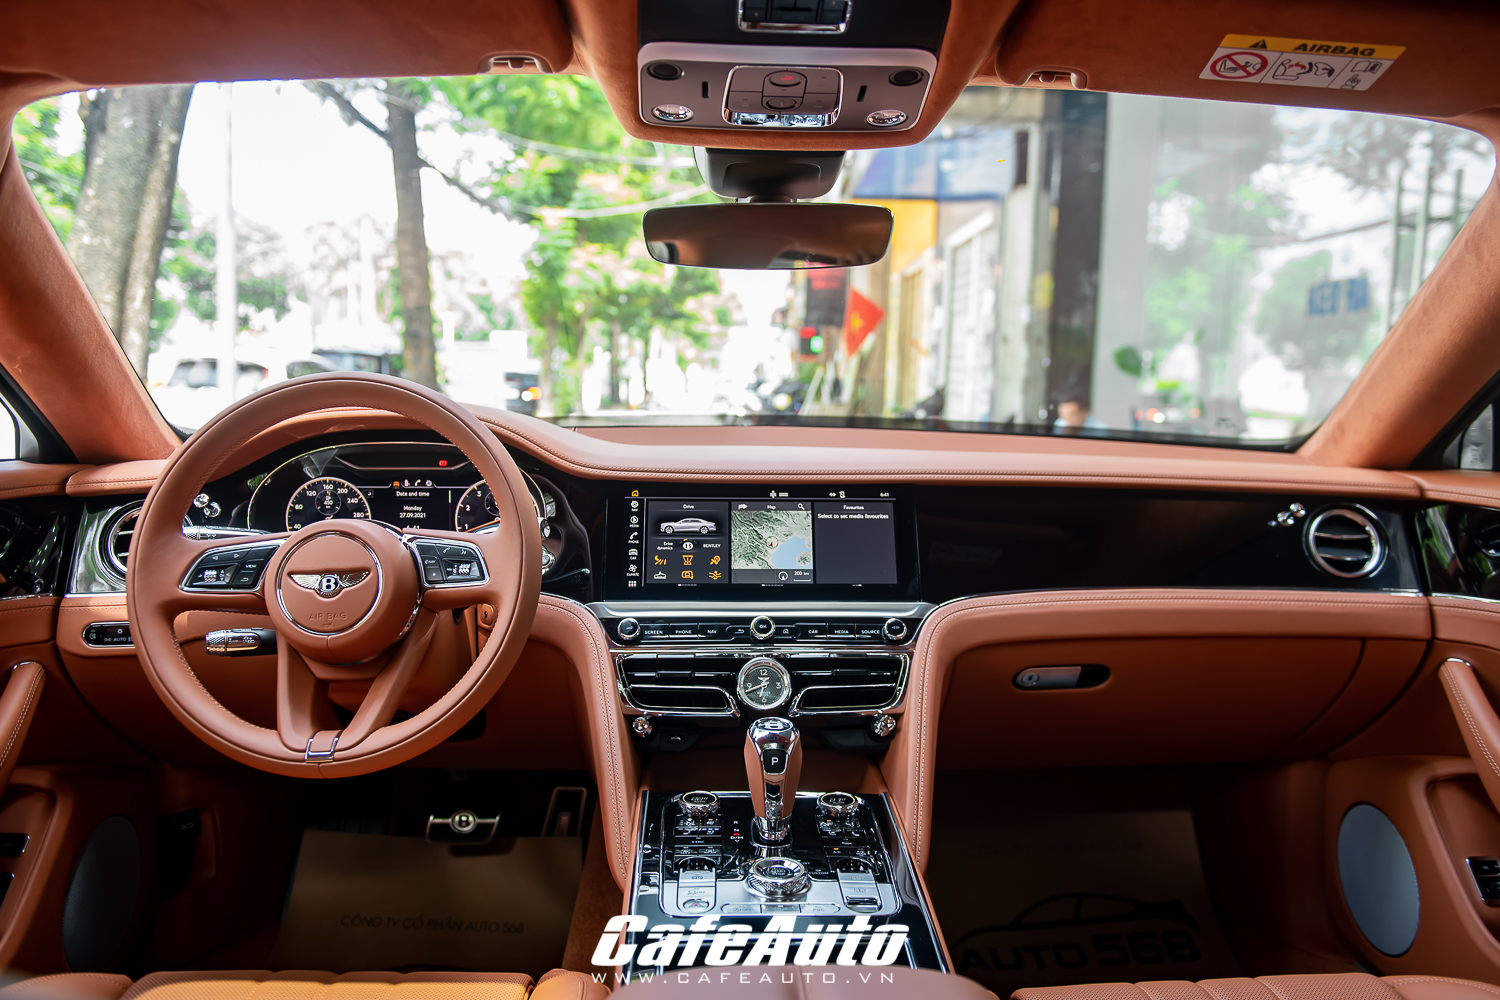 doan-di-bang-mua-bentley-flying-spur-20-ty-cafeautovn-9